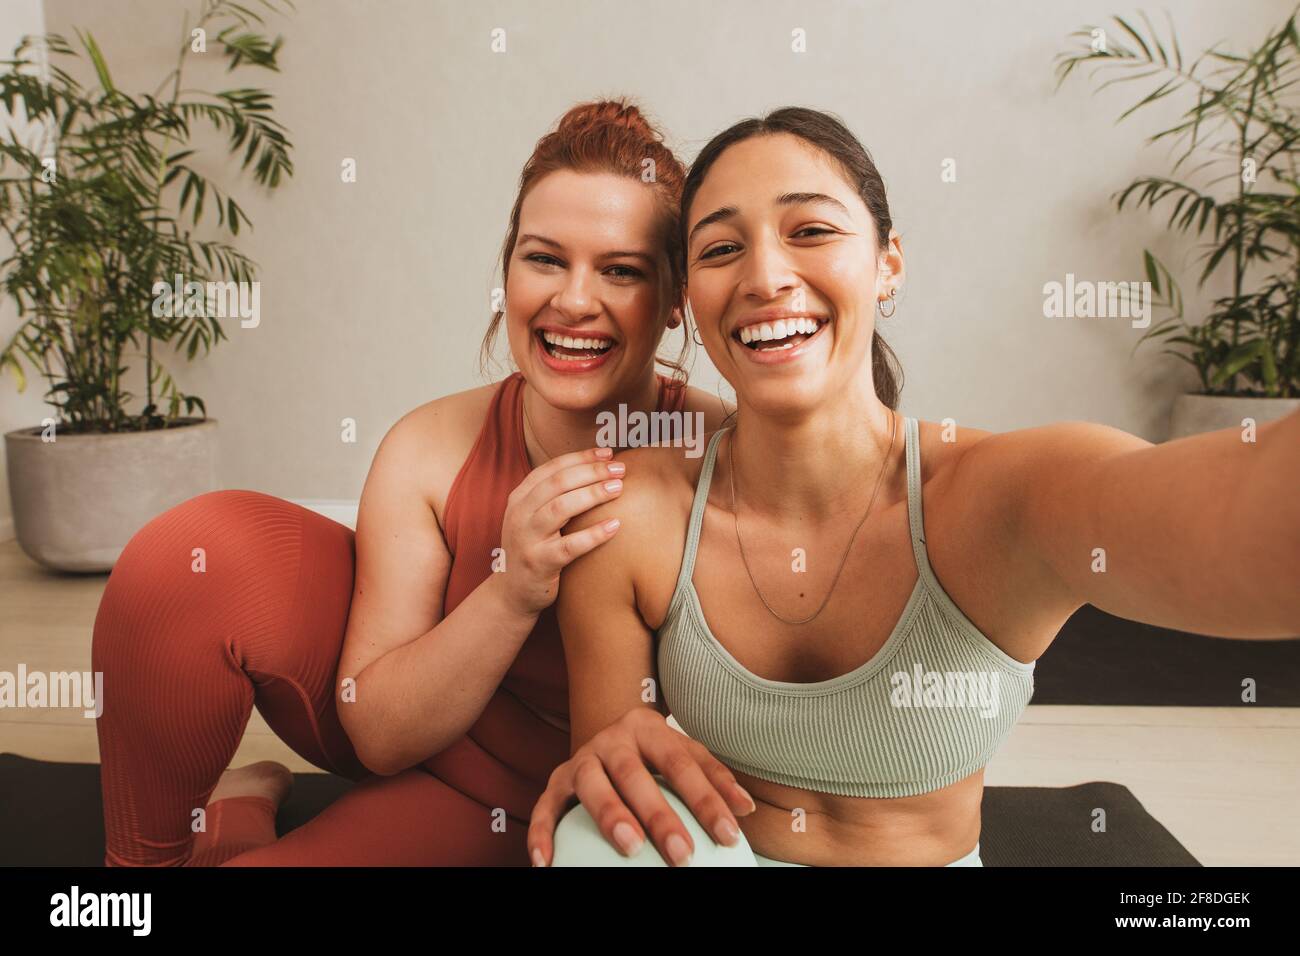 Cheerful female friends taking selife at yoga gym. Women in sports wear taking a break from workout and talking selfie at fitness studio. Stock Photo